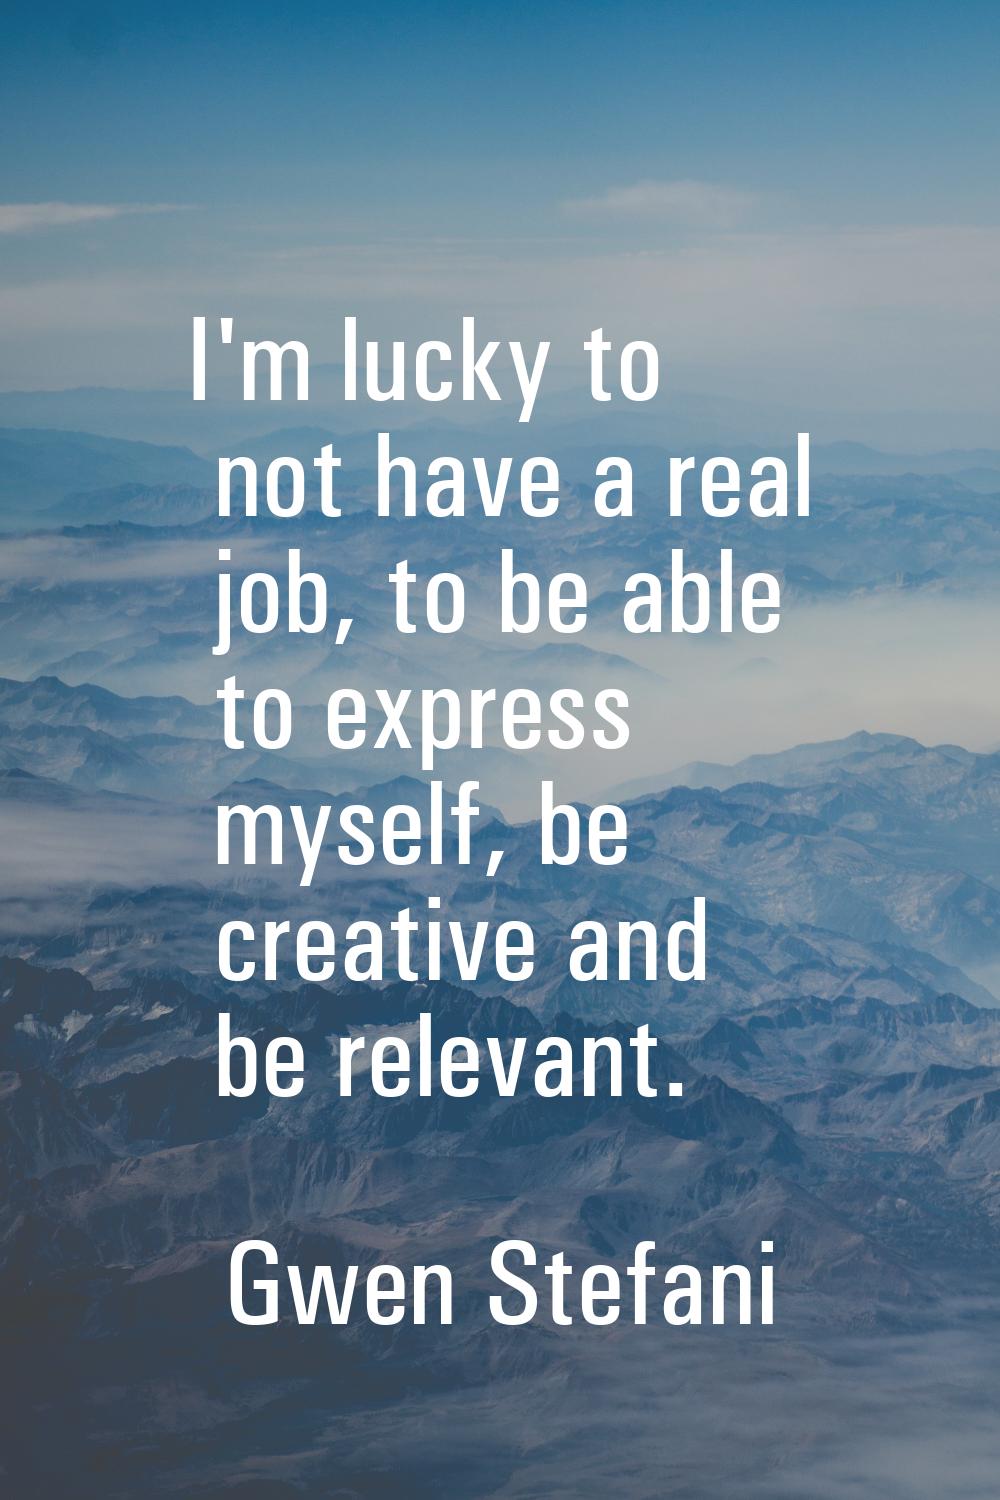 I'm lucky to not have a real job, to be able to express myself, be creative and be relevant.